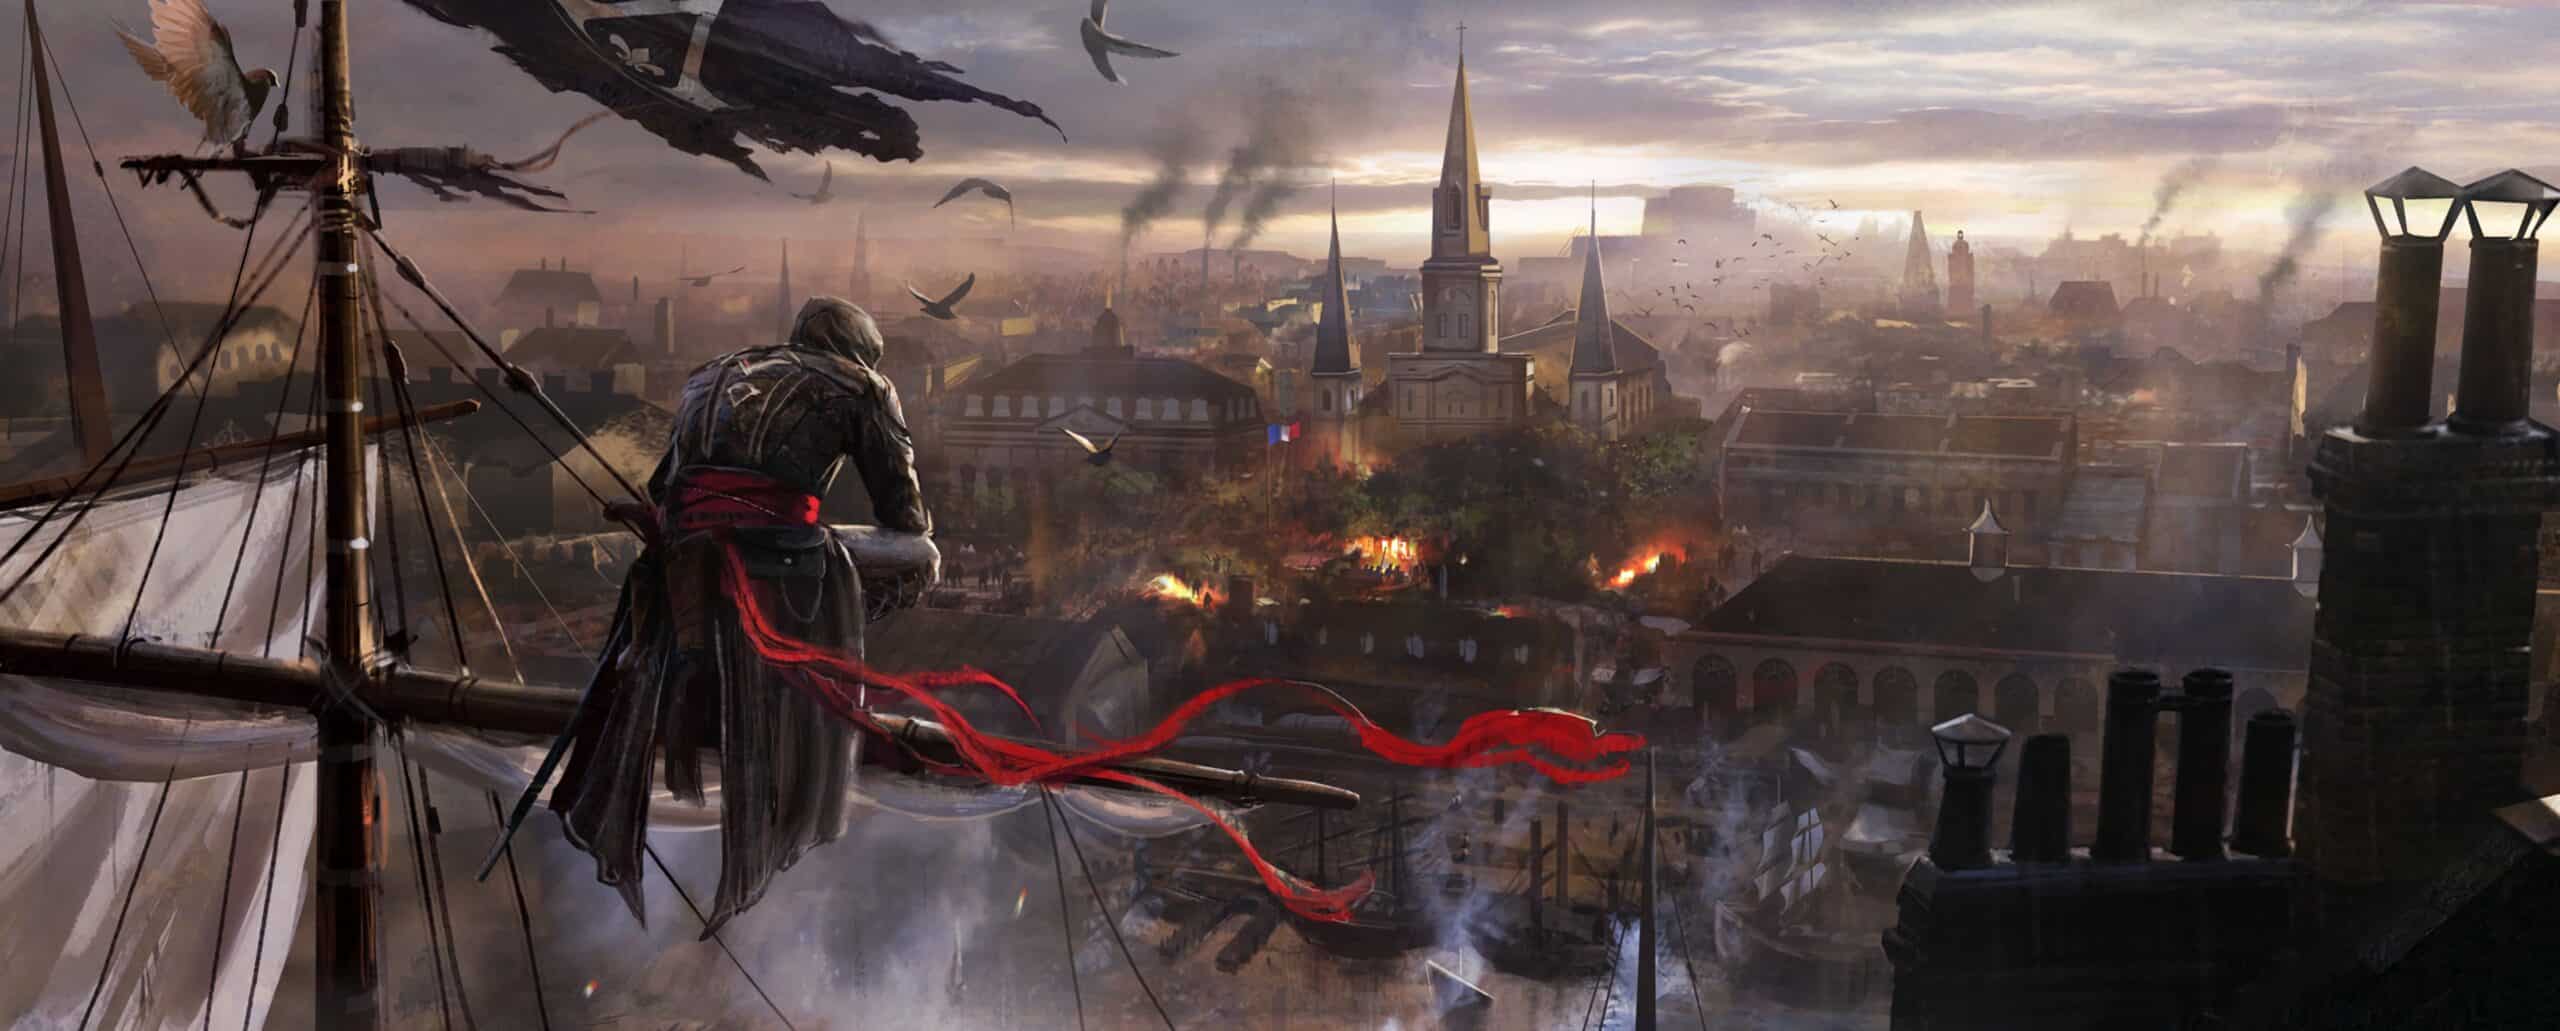 Screencapture from Assassin's Creed Unity gameplay